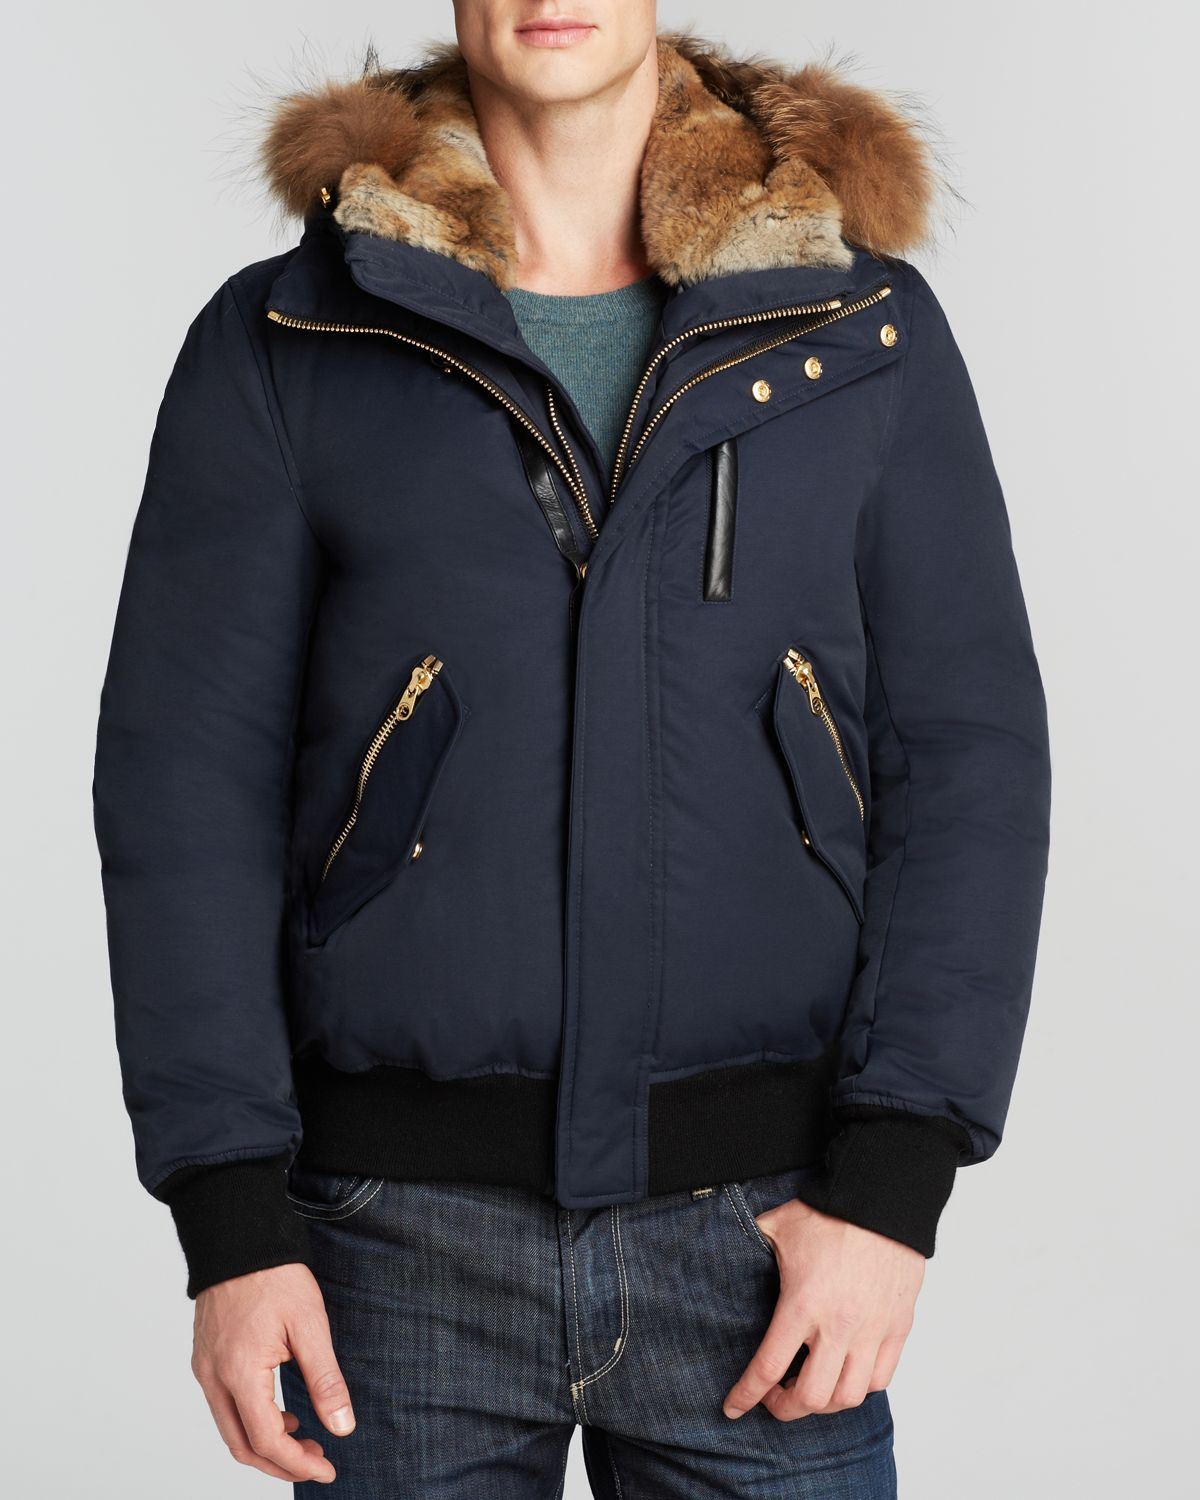 Lyst - Mackage Dixon Peach Lux Jacket With Fur in Blue for Men